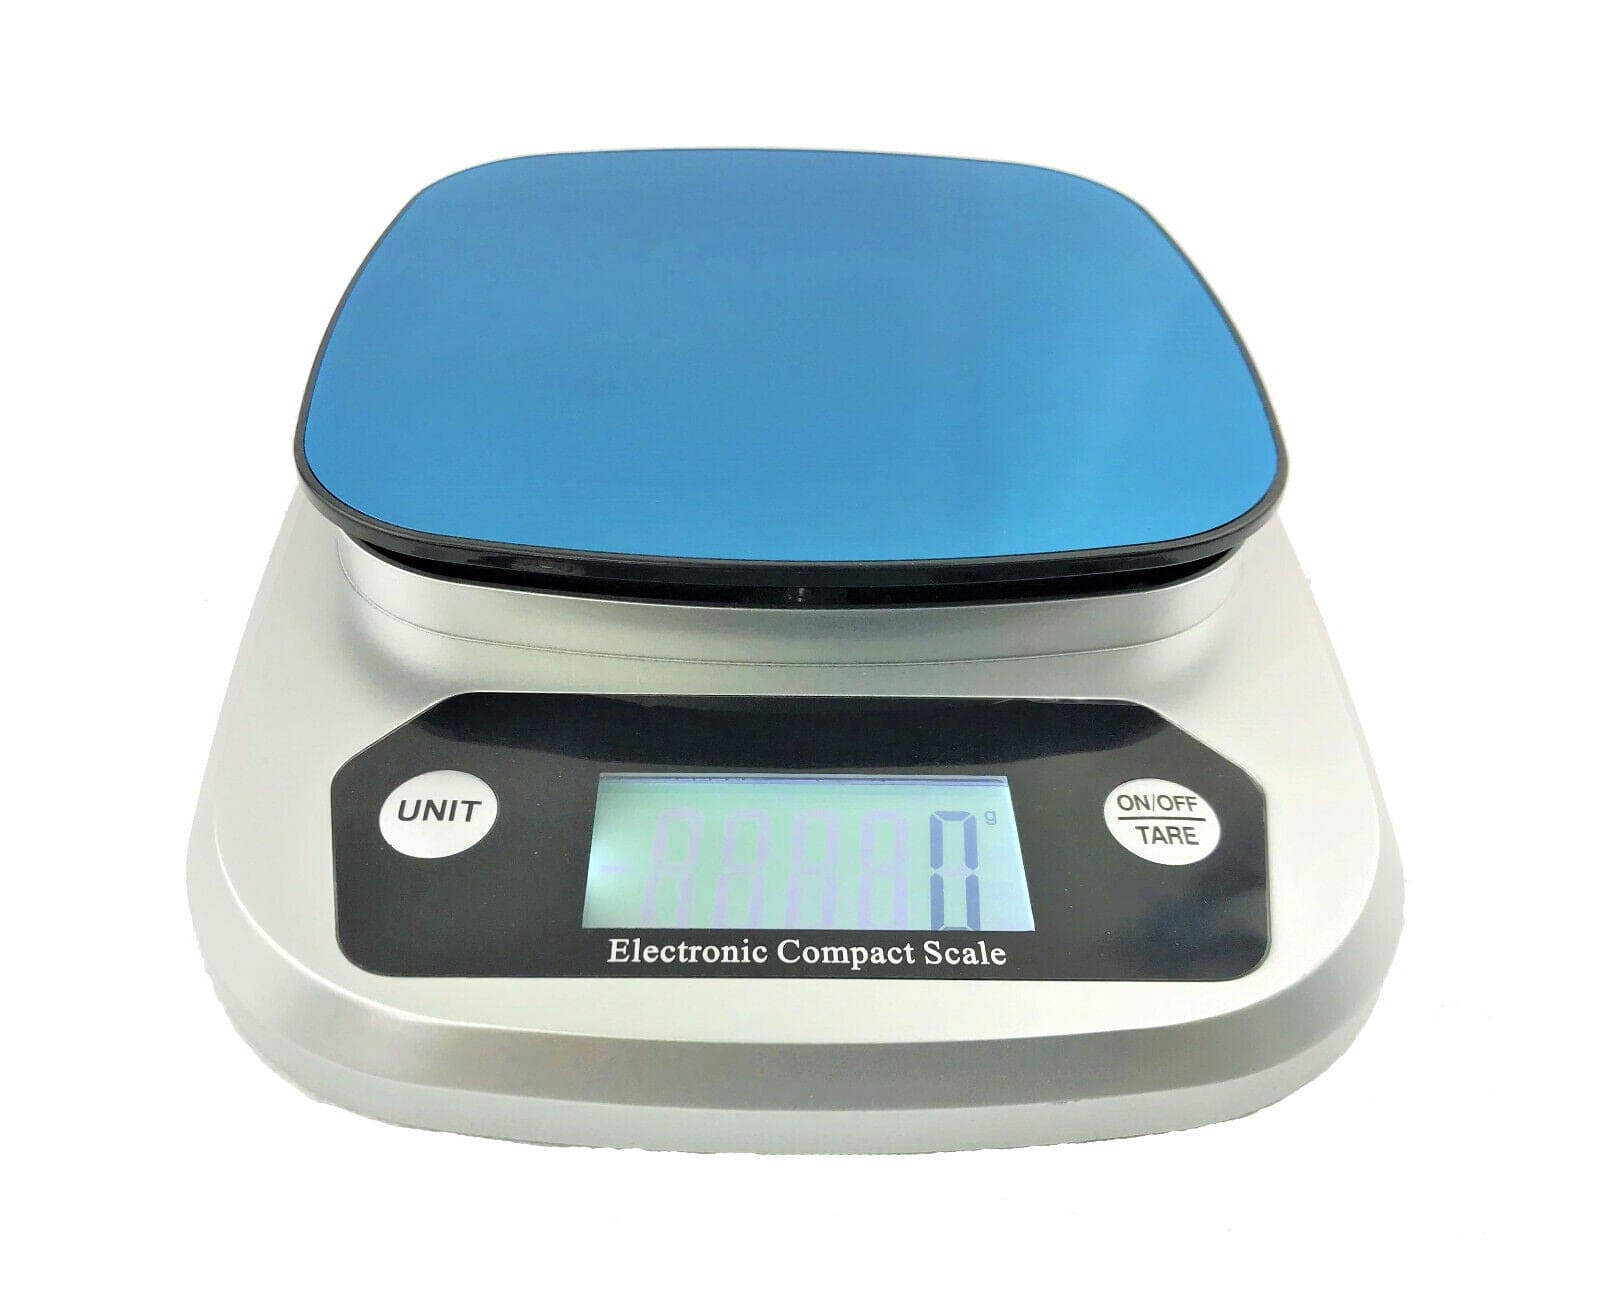 LED Kitchen Scale, Electronic Food Balance Measuring Weight Machine, 10Kg Digital Precious Device, Multipurpose Digital Scale